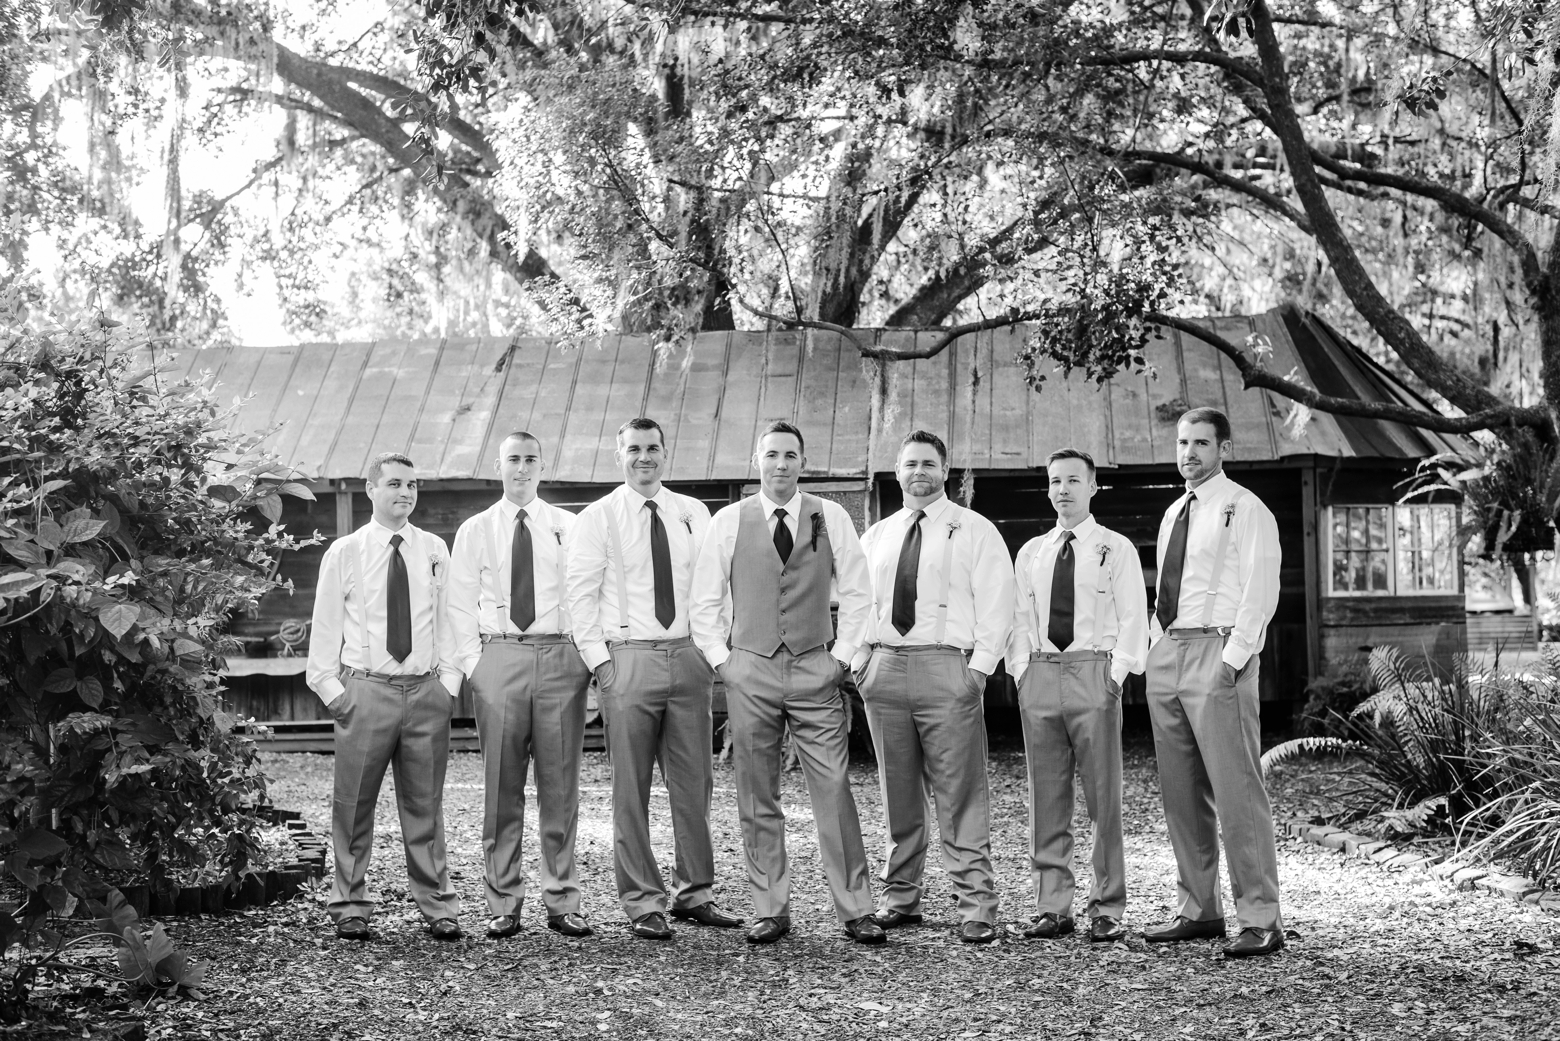 The Groom and his Groomsmen in a formal black and white portrait